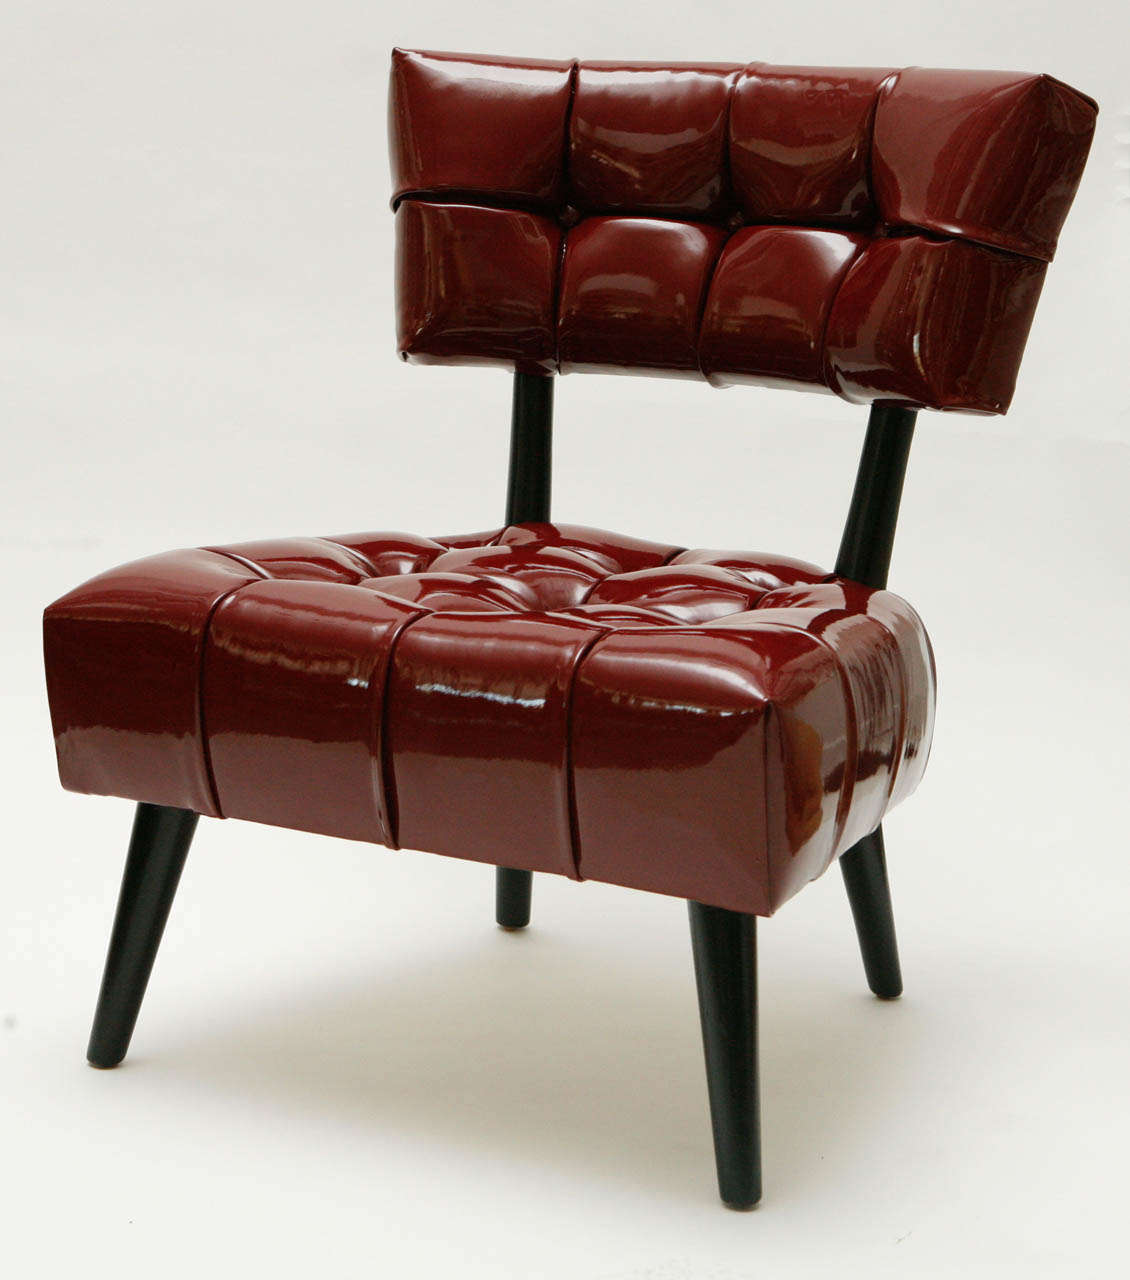 Mid-Century Modern Pair of Biscuit-Tufted Hostess Chairs by William Haines